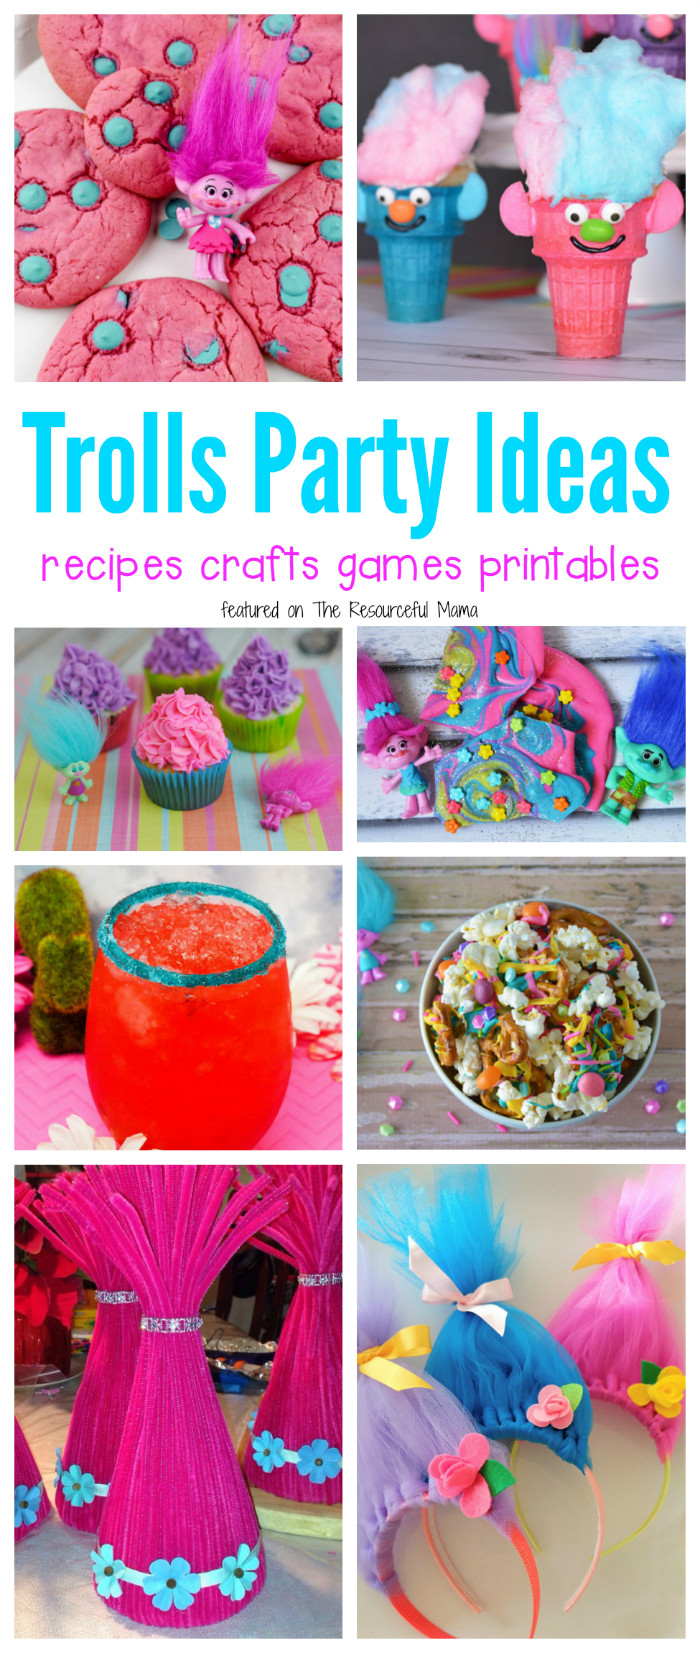 Food Ideas For A Troll Party
 Pin on The Resourceful Mama